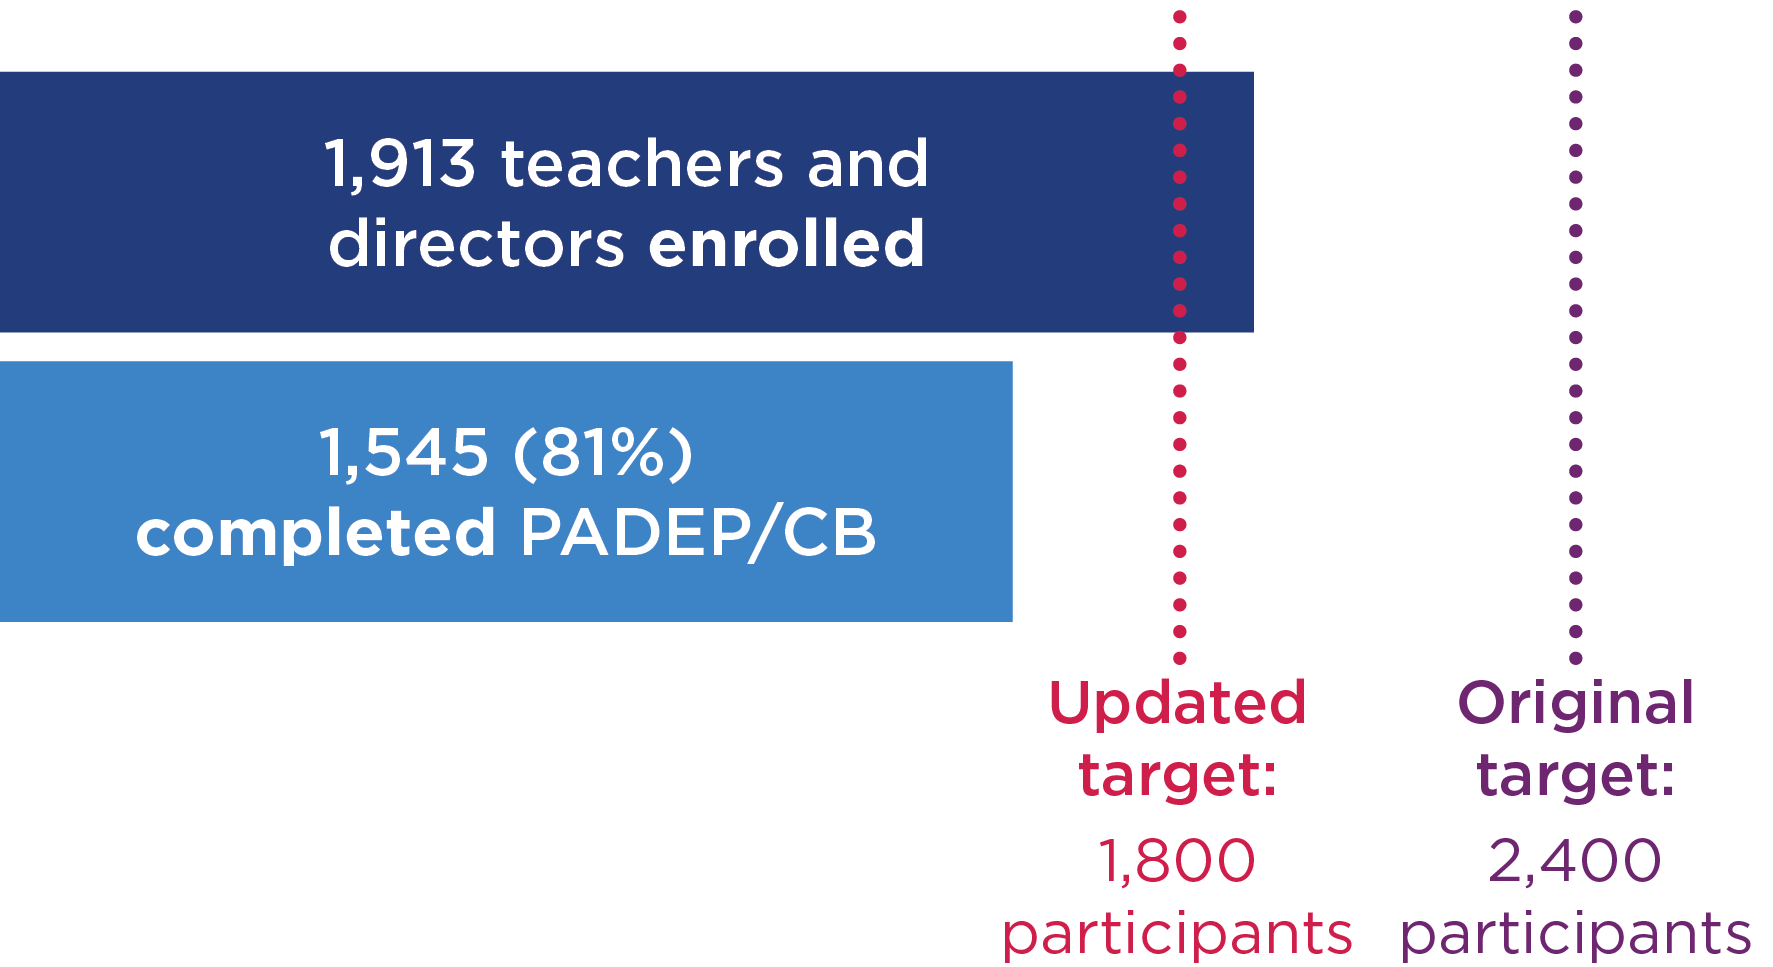 PADEP/Ciclo Basico enrollment targets and actual enrollment. 1,913 teachers and directors were enrolled, and1,545 completed, PADEP/CB versus an original target of 2,400 and an updated target of 1,800. 